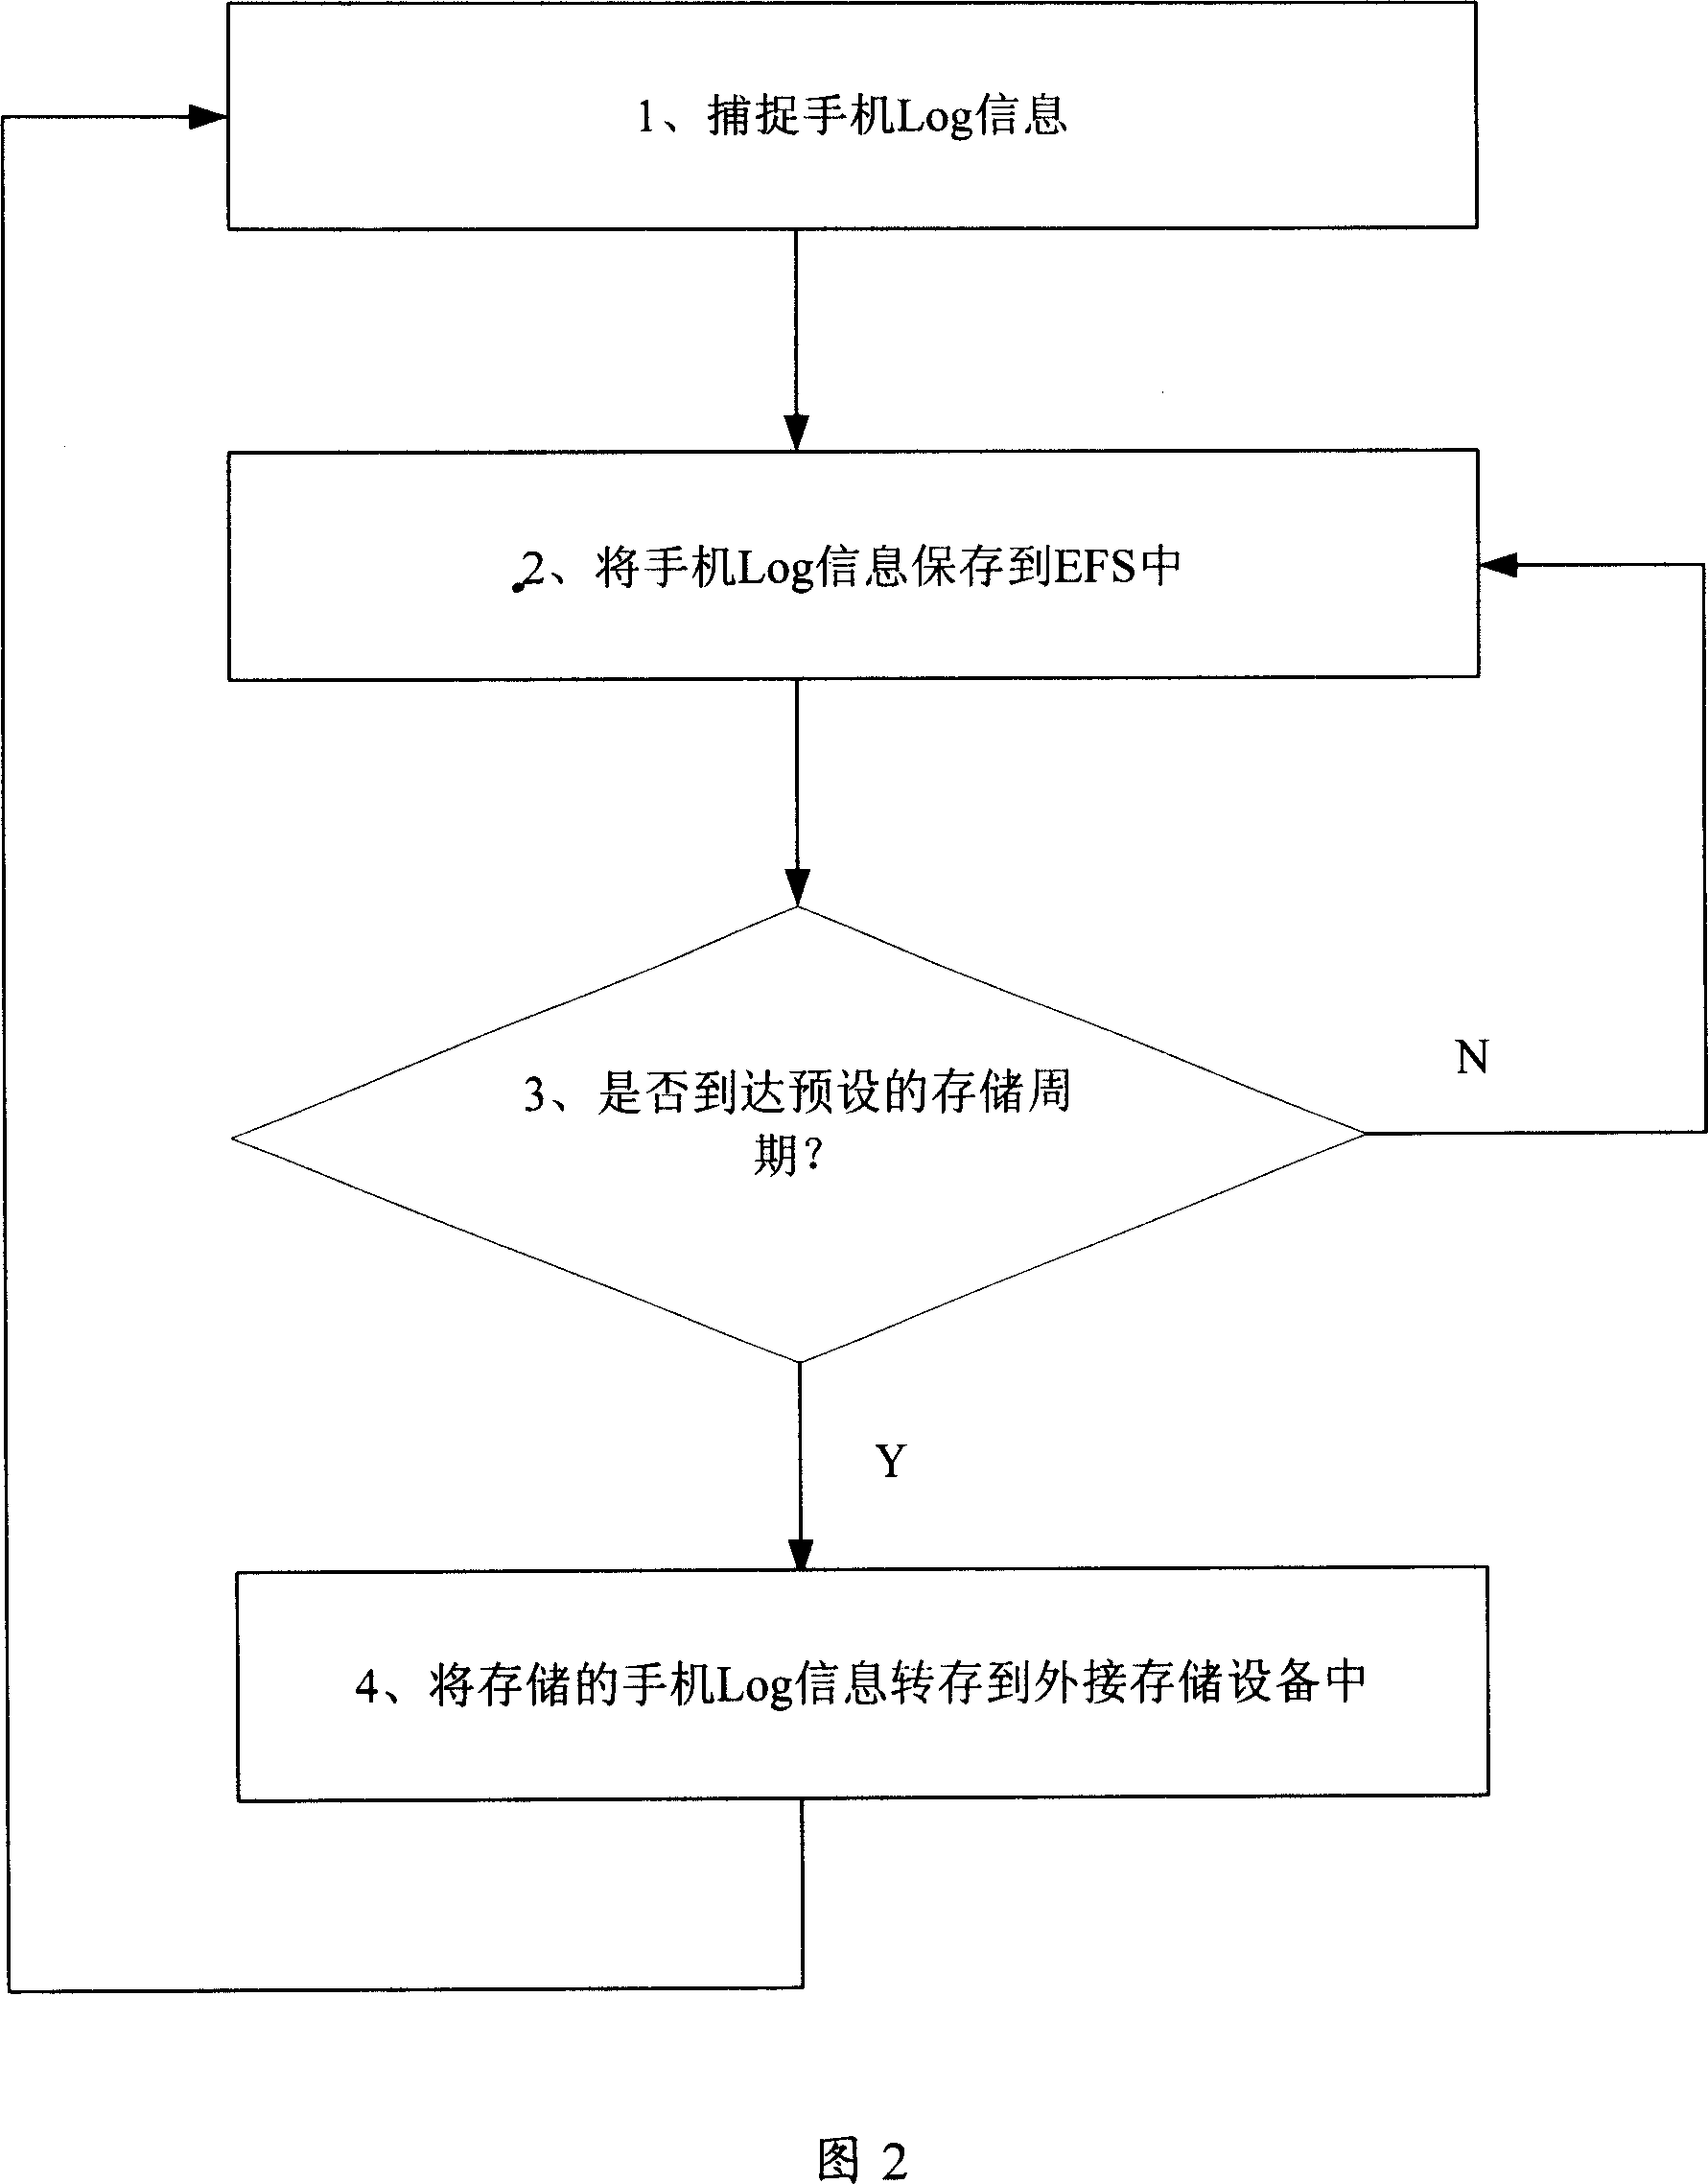 Method and system for mobile terminal test